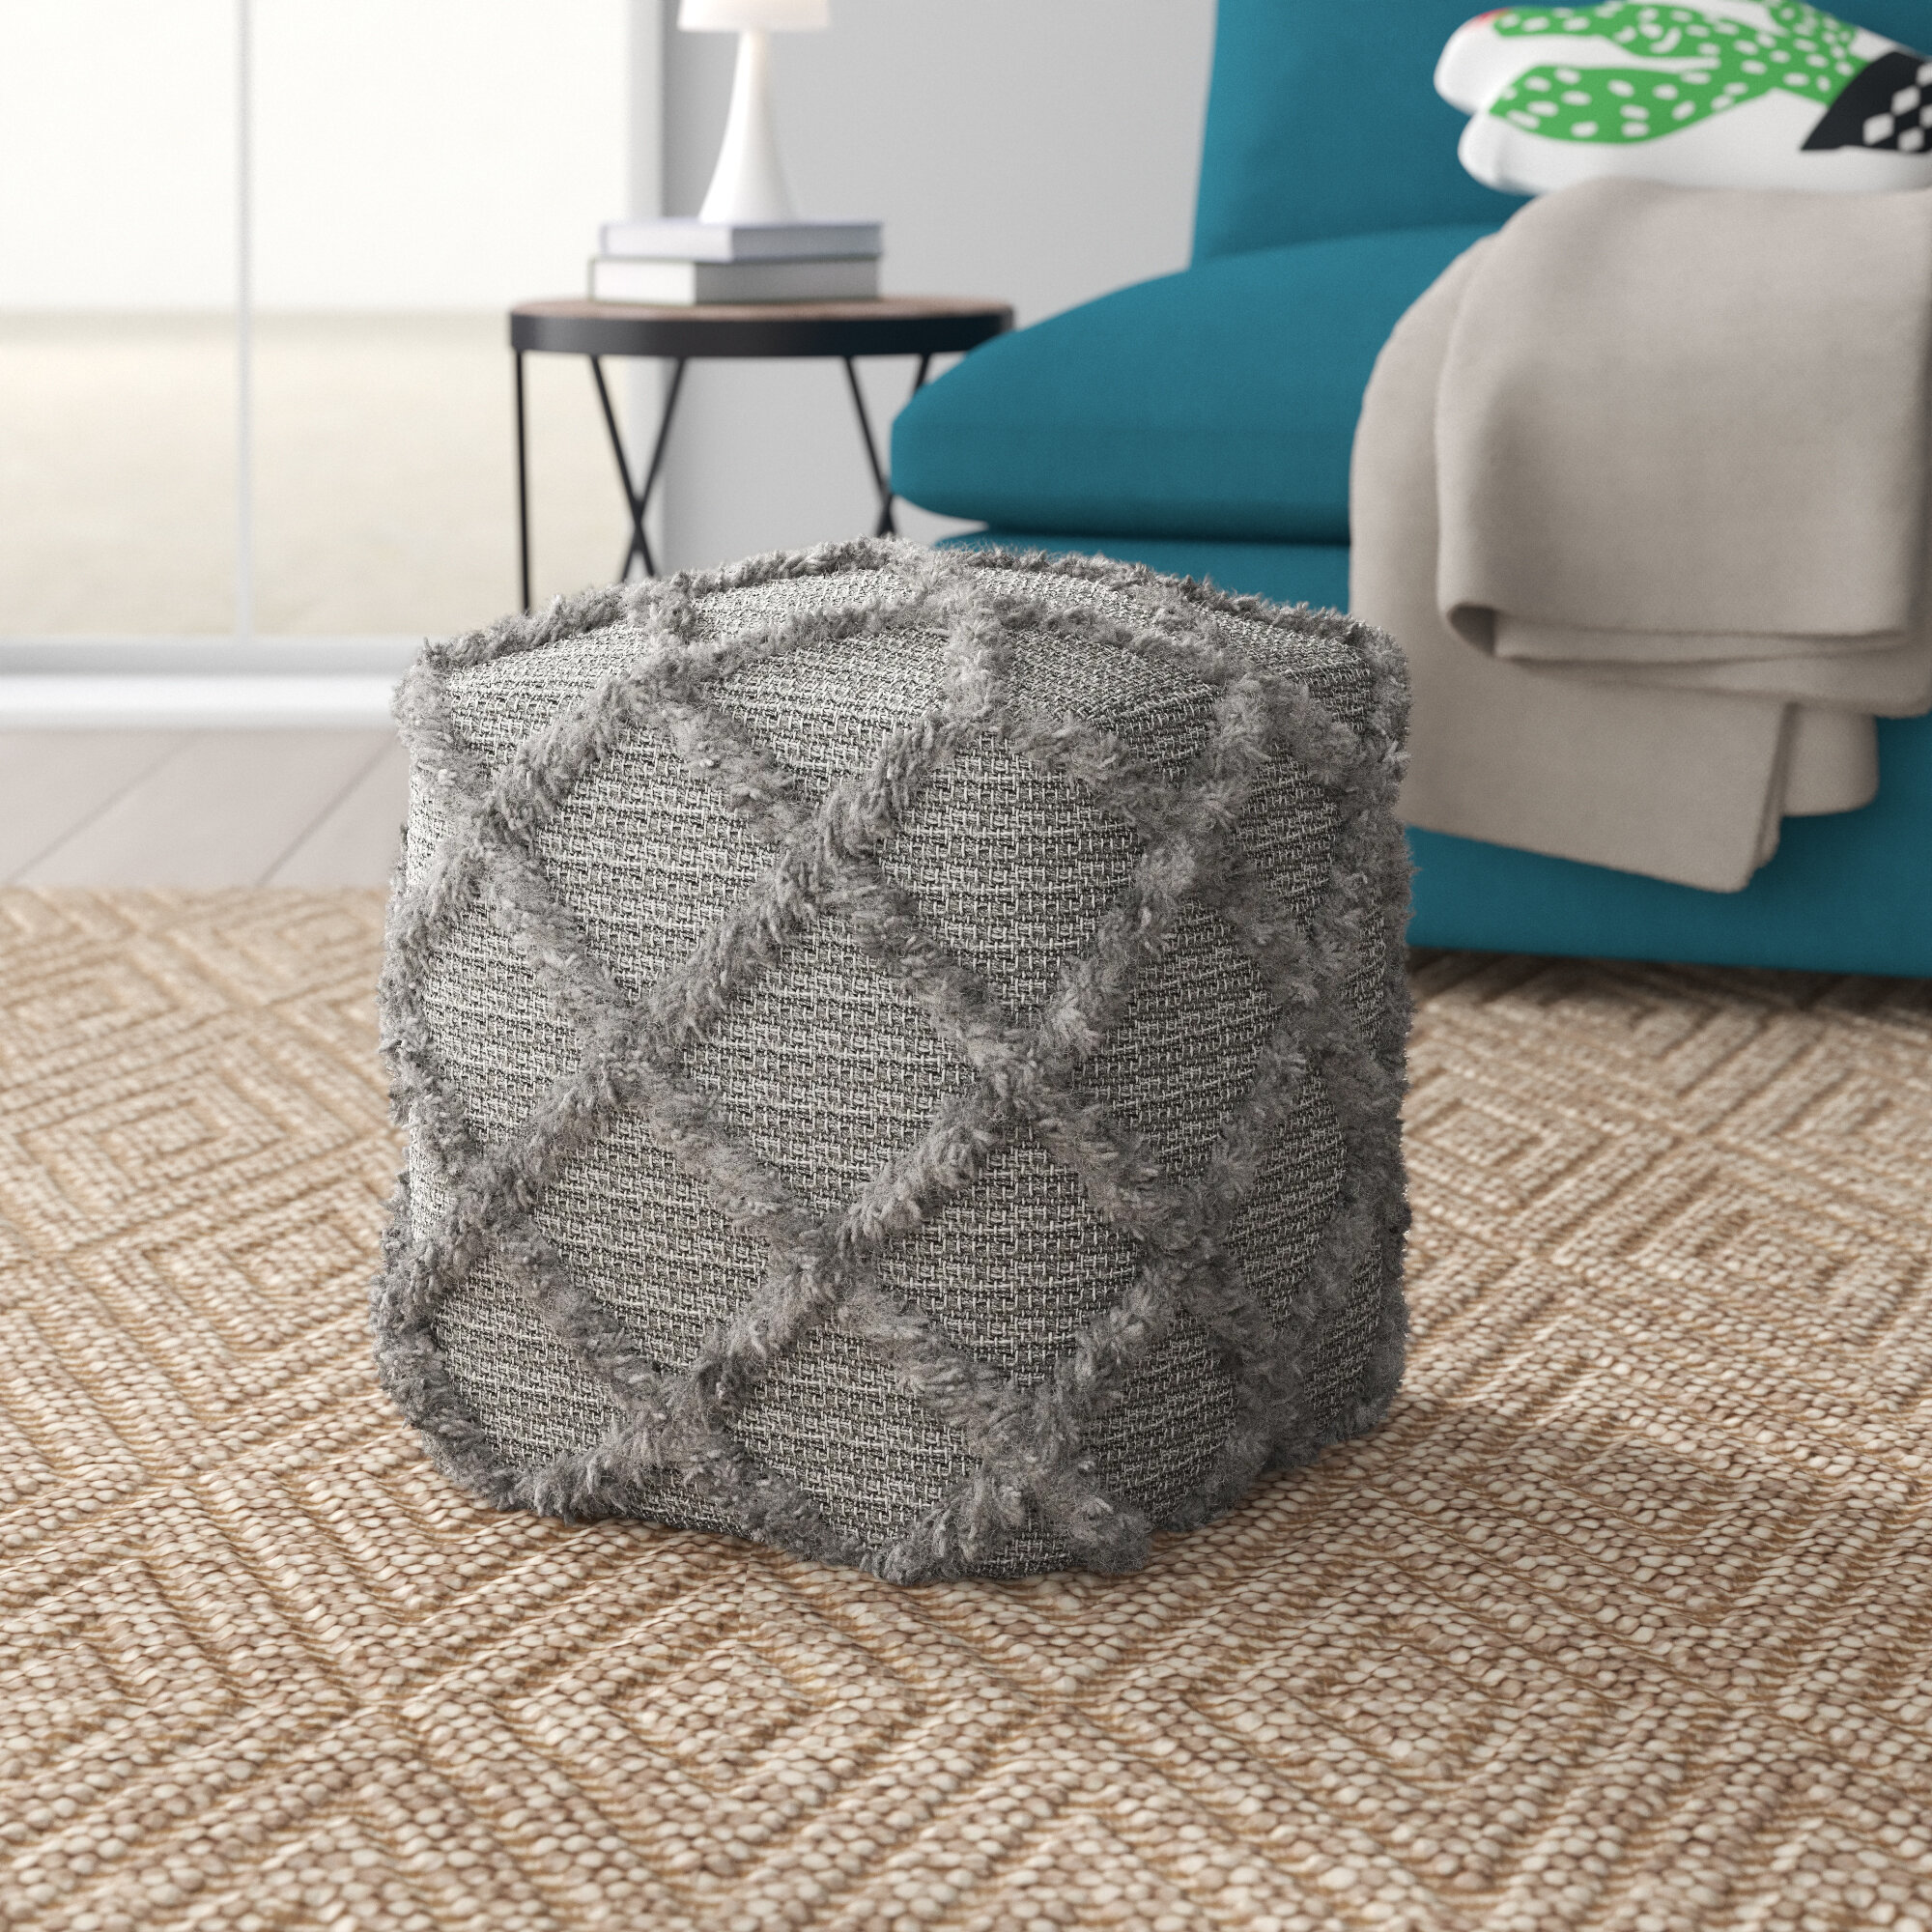 How to Easily Refluff a Pouf or Ottoman